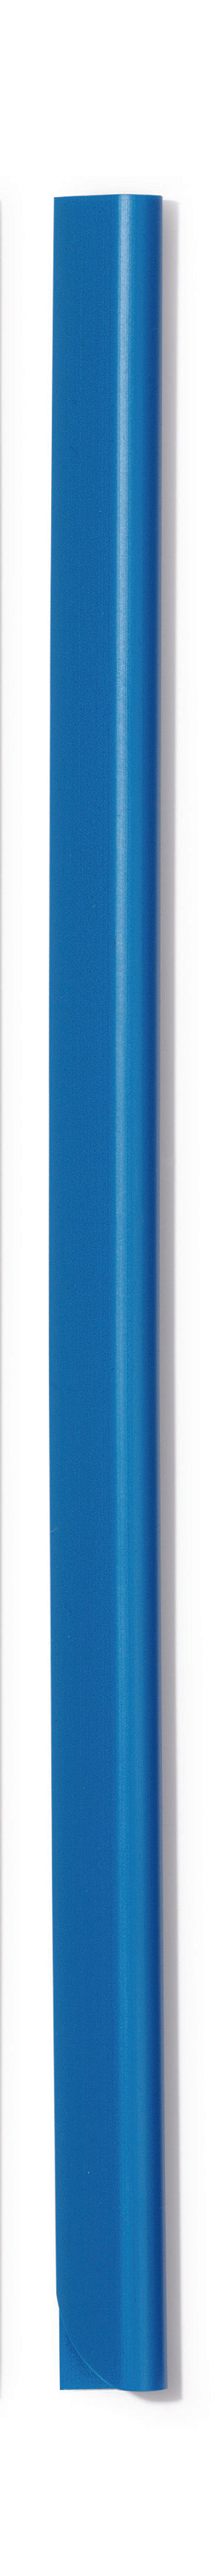 Durable Spine Bar A4 6mm Blue (Pack 100) - 290106 - NWT FM SOLUTIONS - YOUR CATERING WHOLESALER